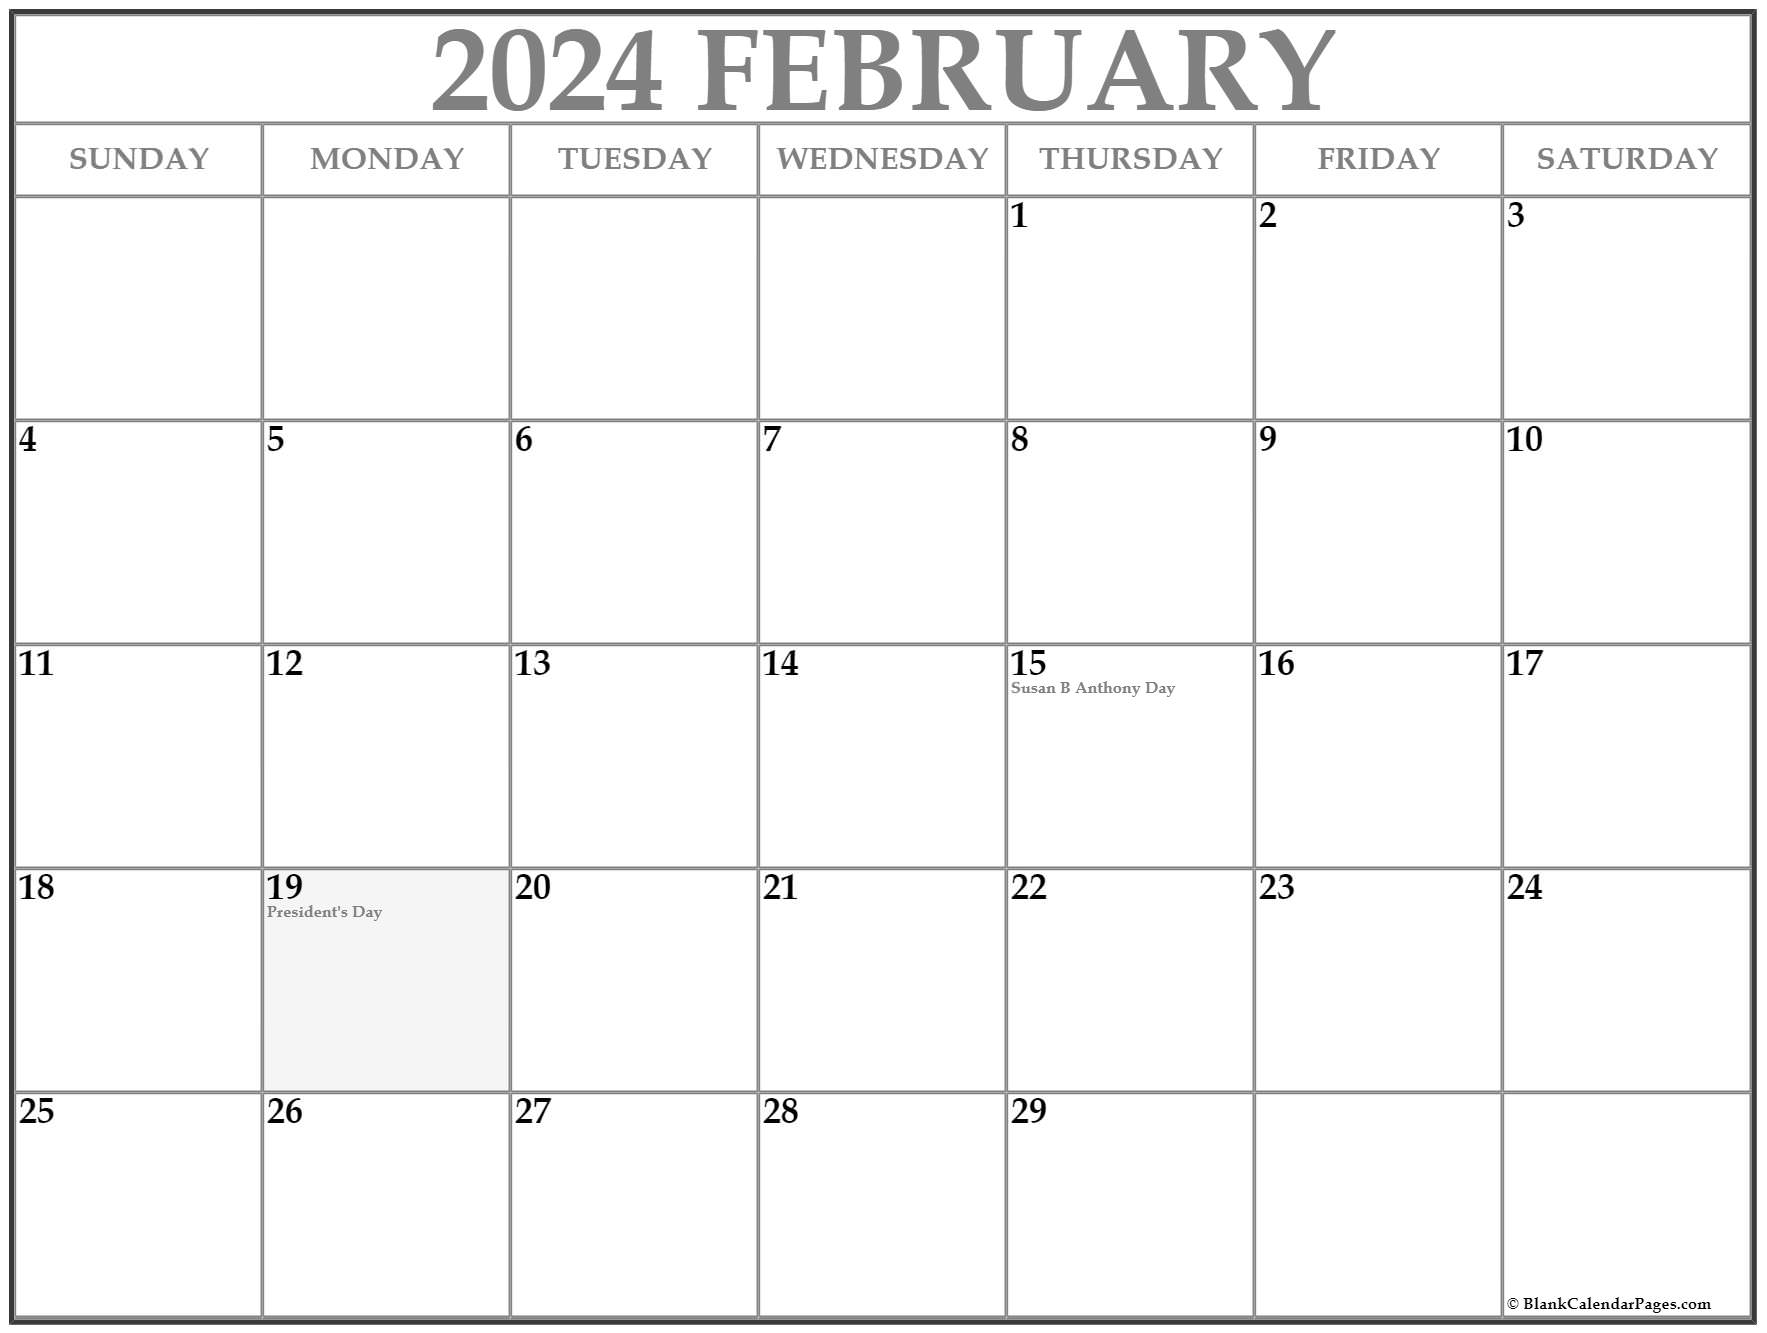 Collection of February 2020 calendars with holidays